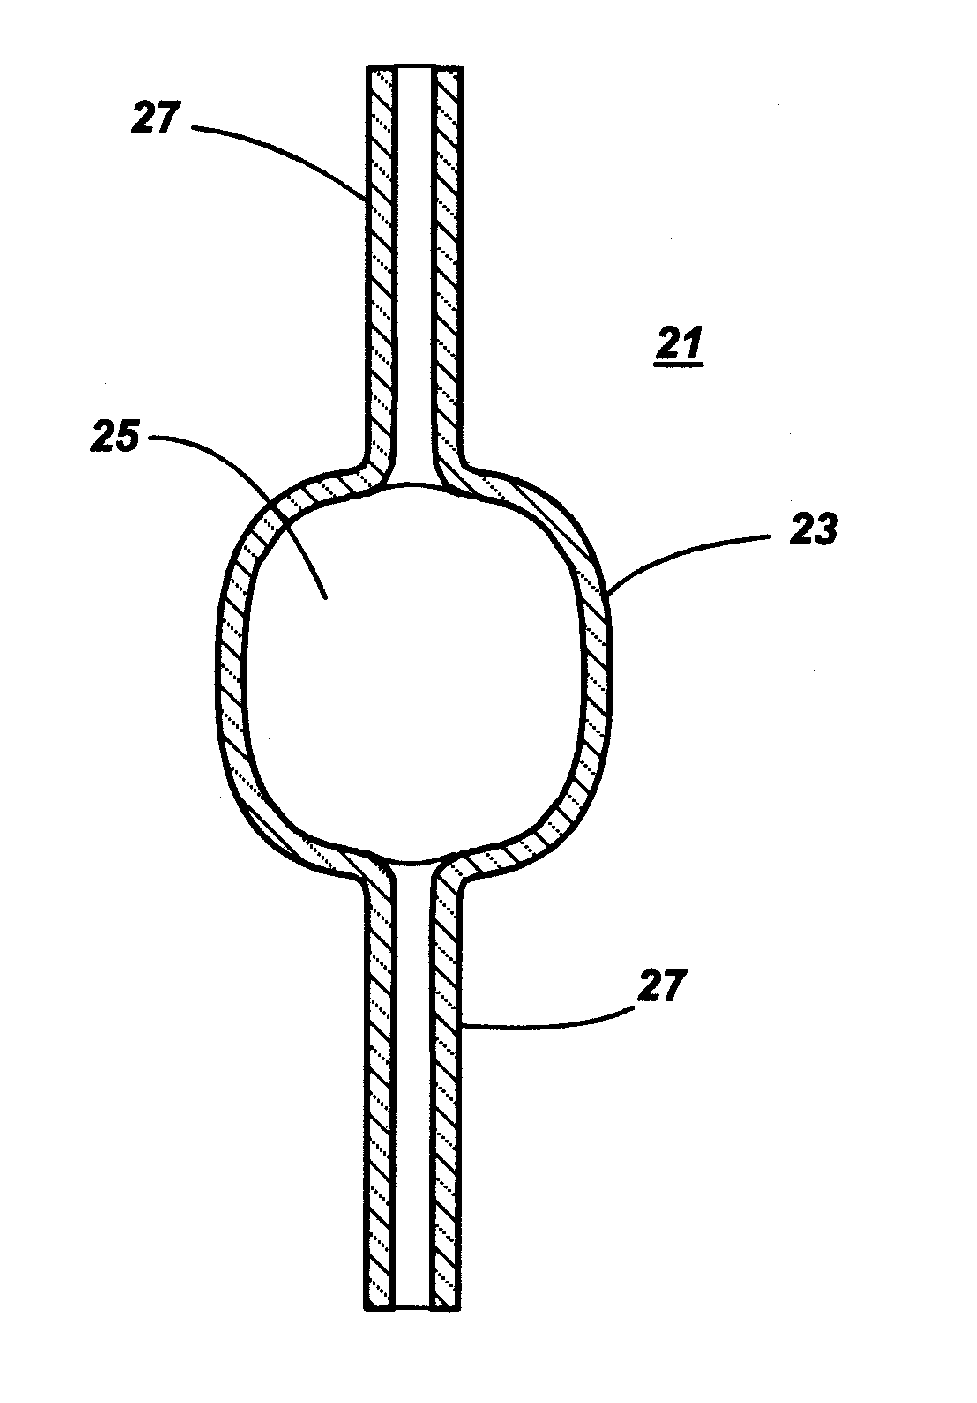 High Total Transmittance Alumina Discharge Vessels Having Submicron Grain Size